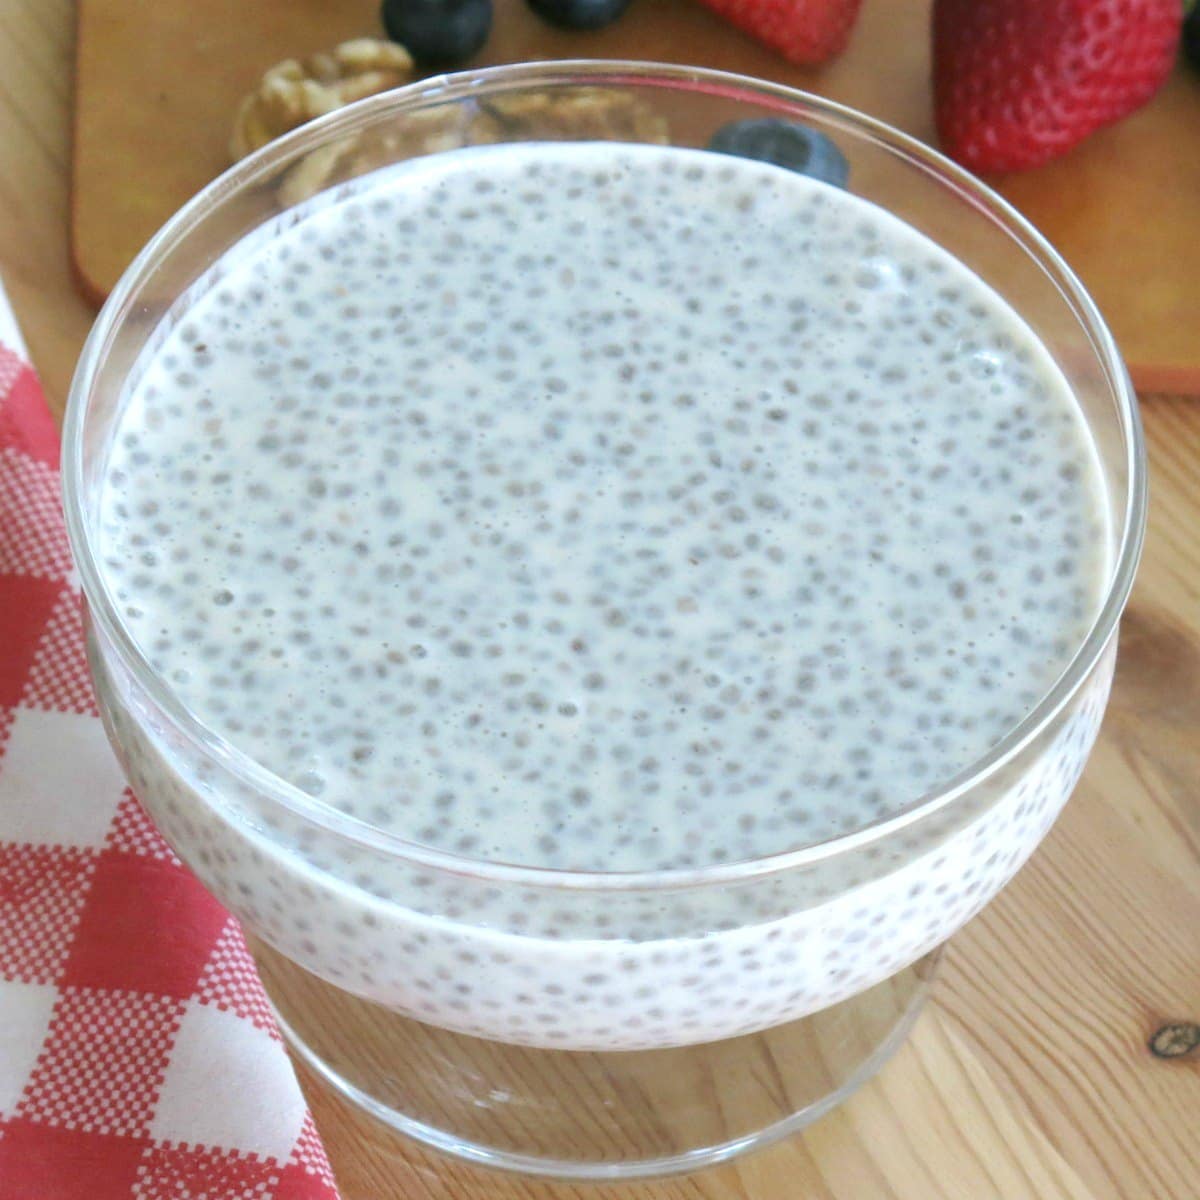 Overnight vanilla chia seed pudding in a glass bowl with no toppings on it.